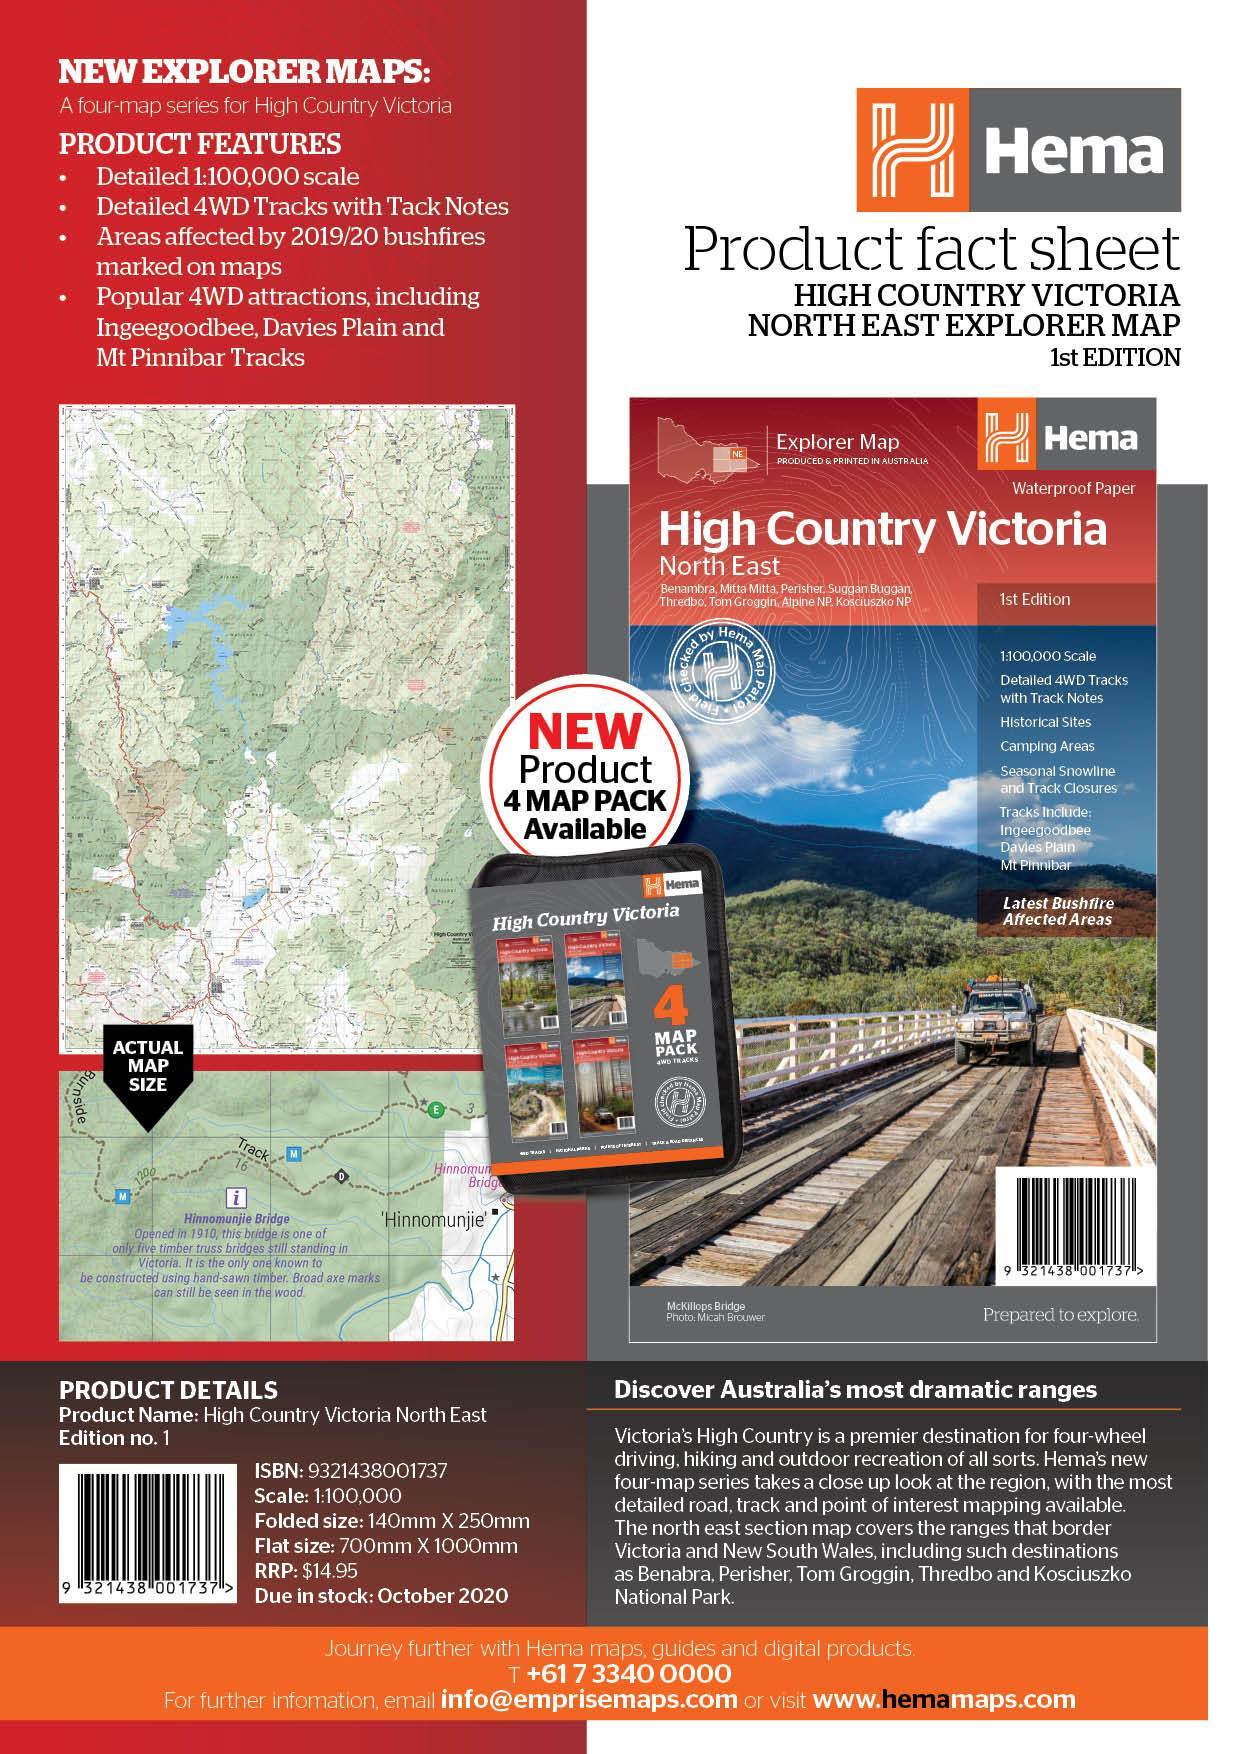 Hema The Victorian High Country - North Eastern Map 1st Edition | Hema